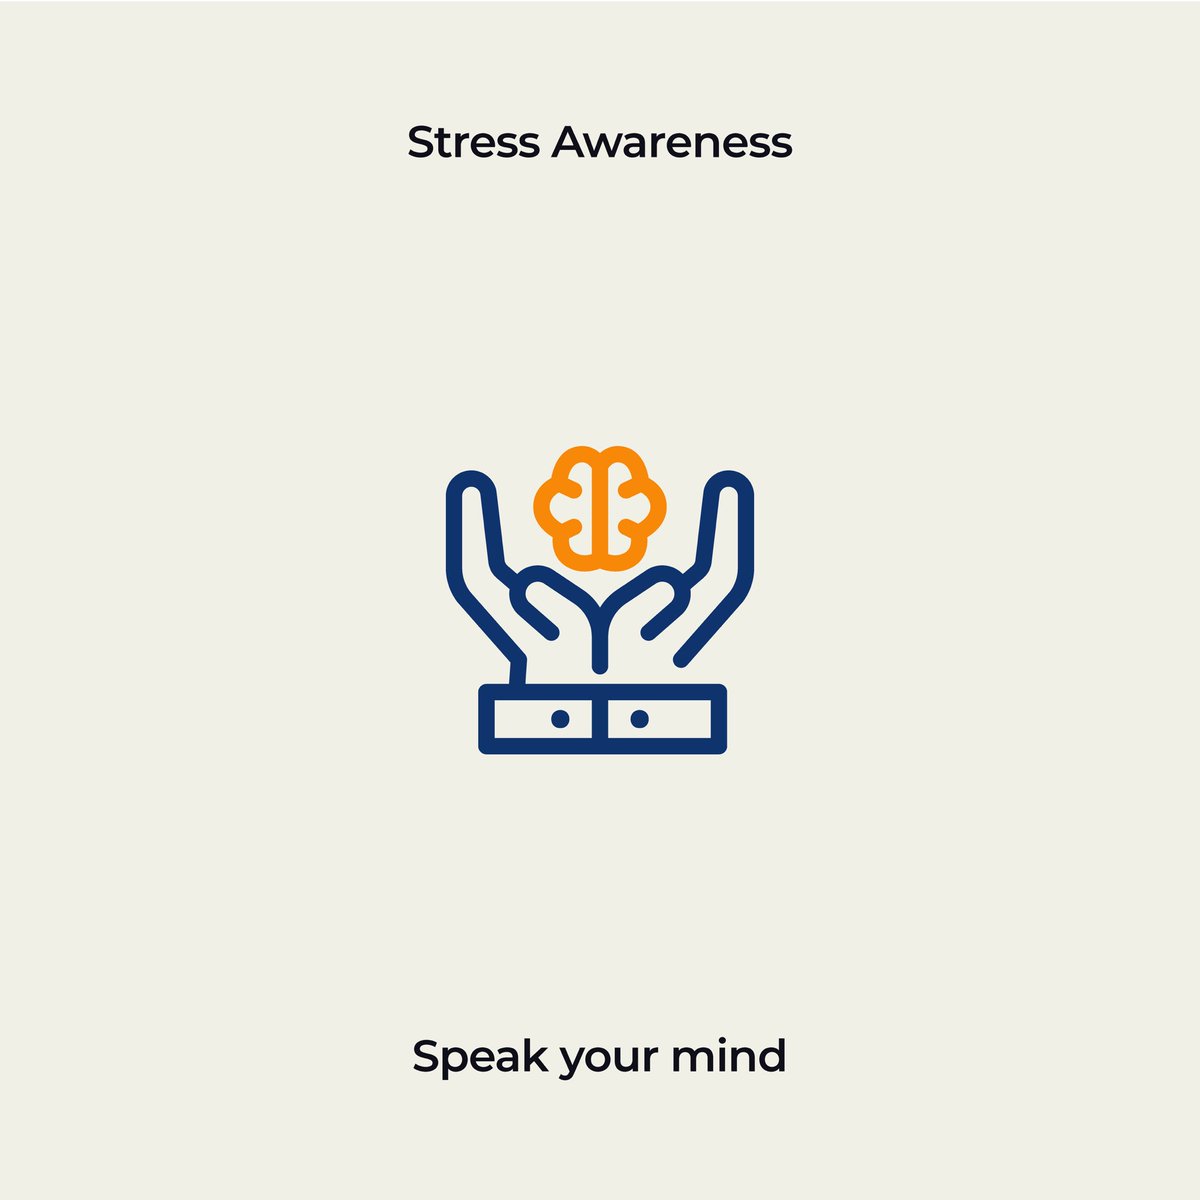 This #StressAwarenessMonth we want to share some tips to help you live a less stressful life💙

#newdirections #socialcare